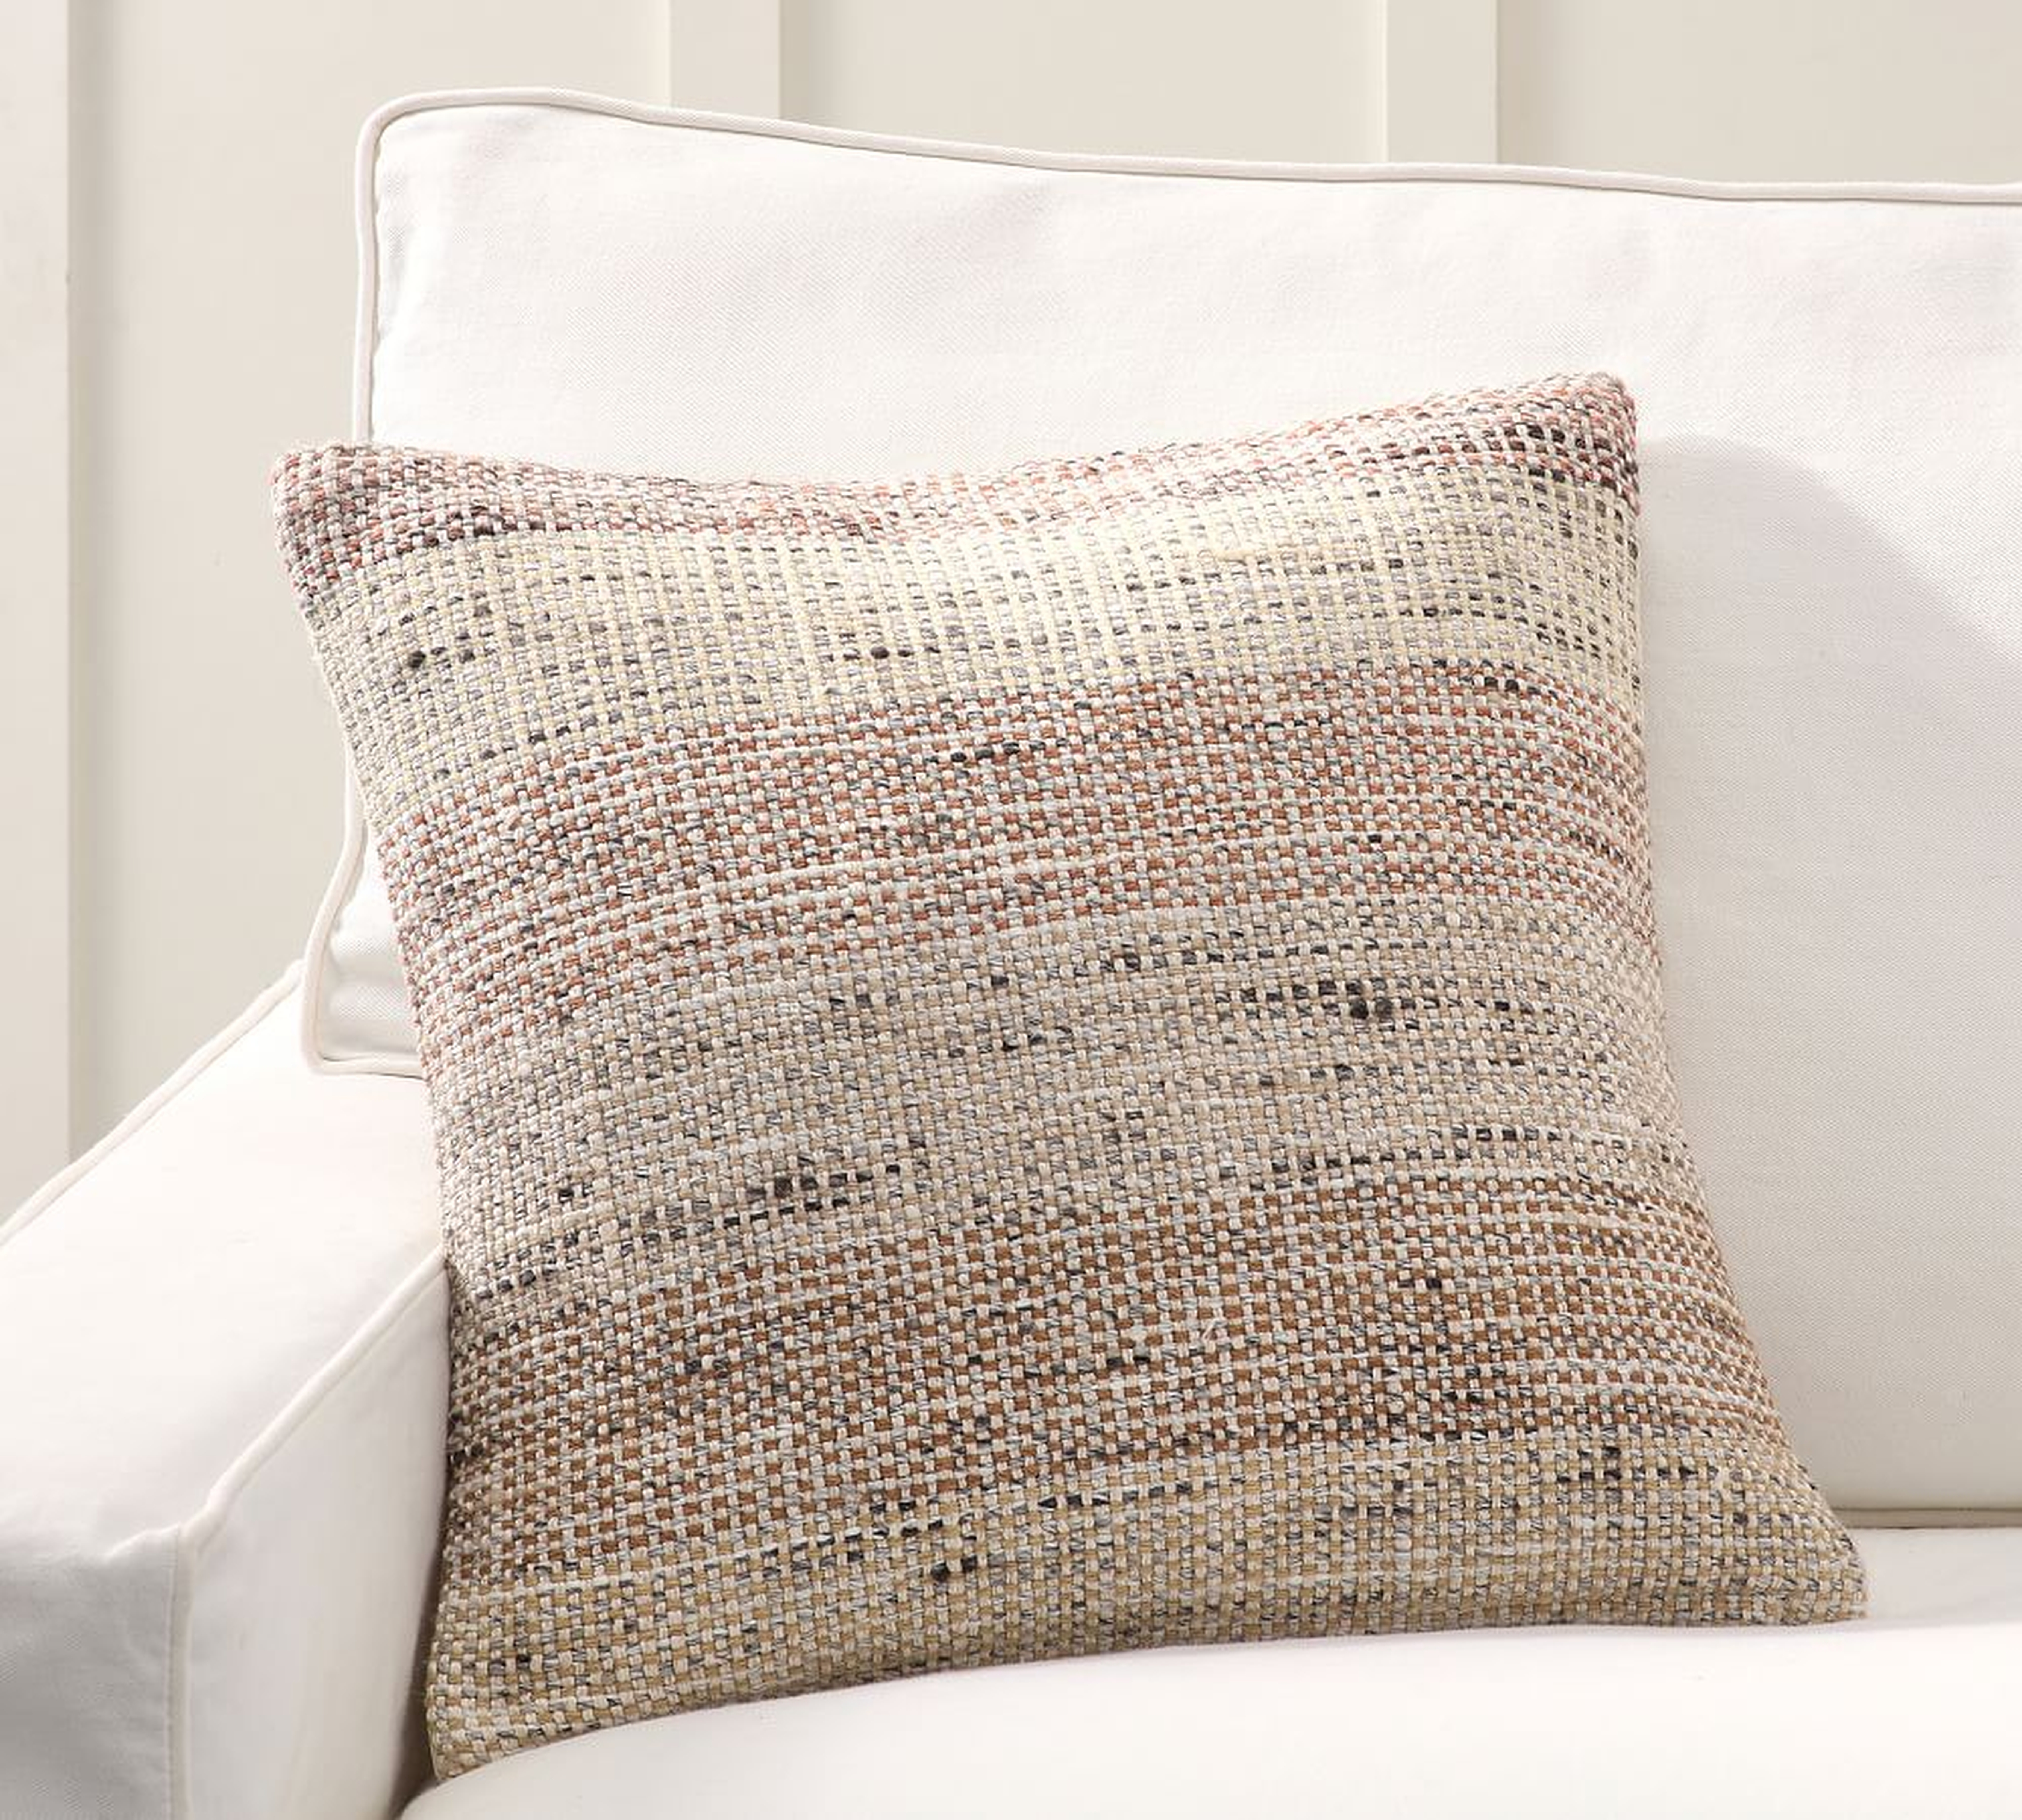 Reeve Textured Striped Pillow, Multi, 20" x 20" - Pottery Barn